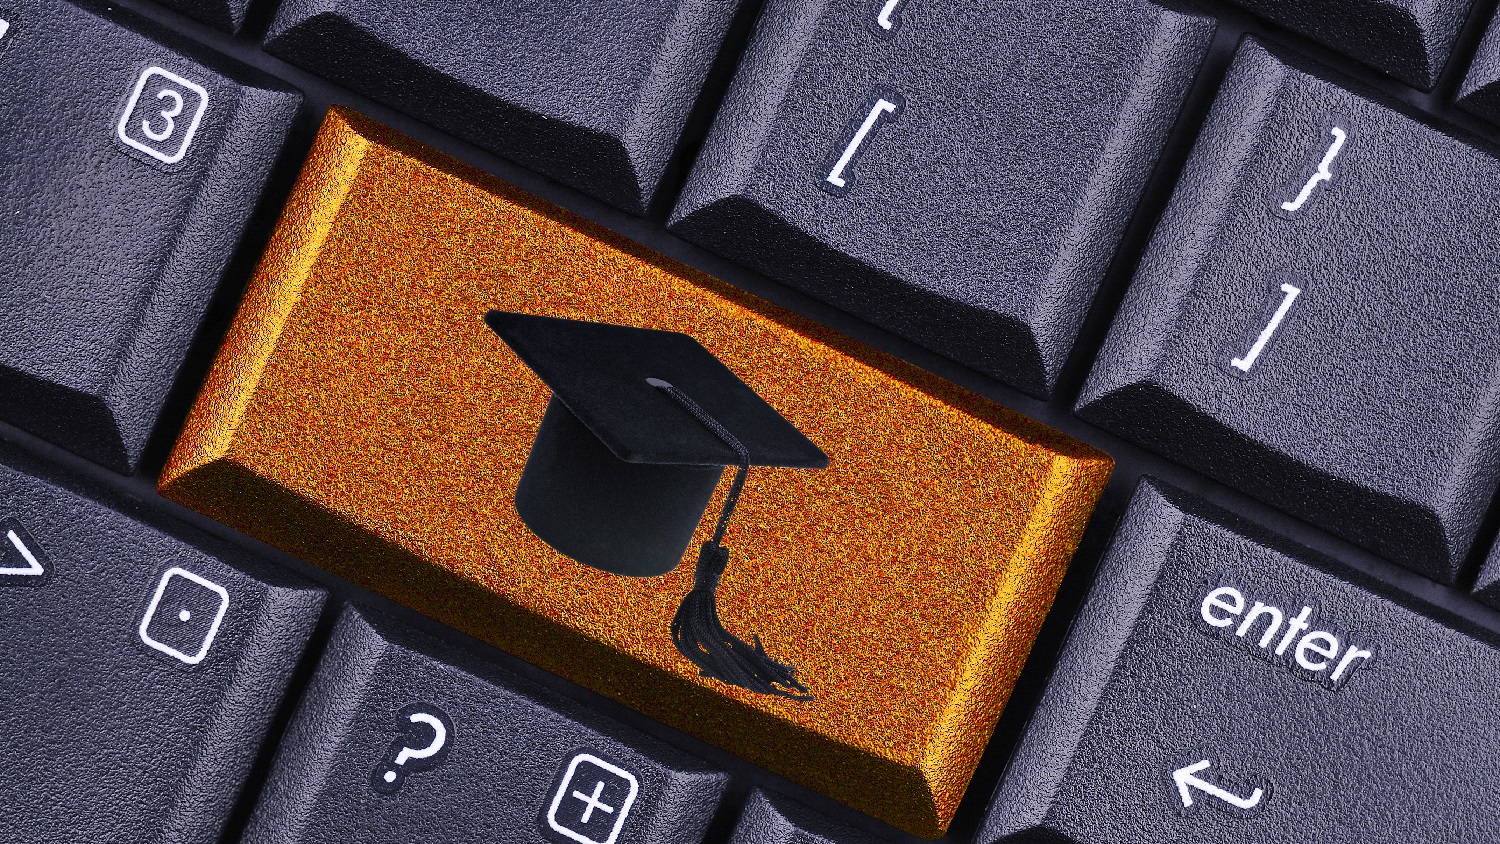 Computer Keyboard with Grad Hat on Button